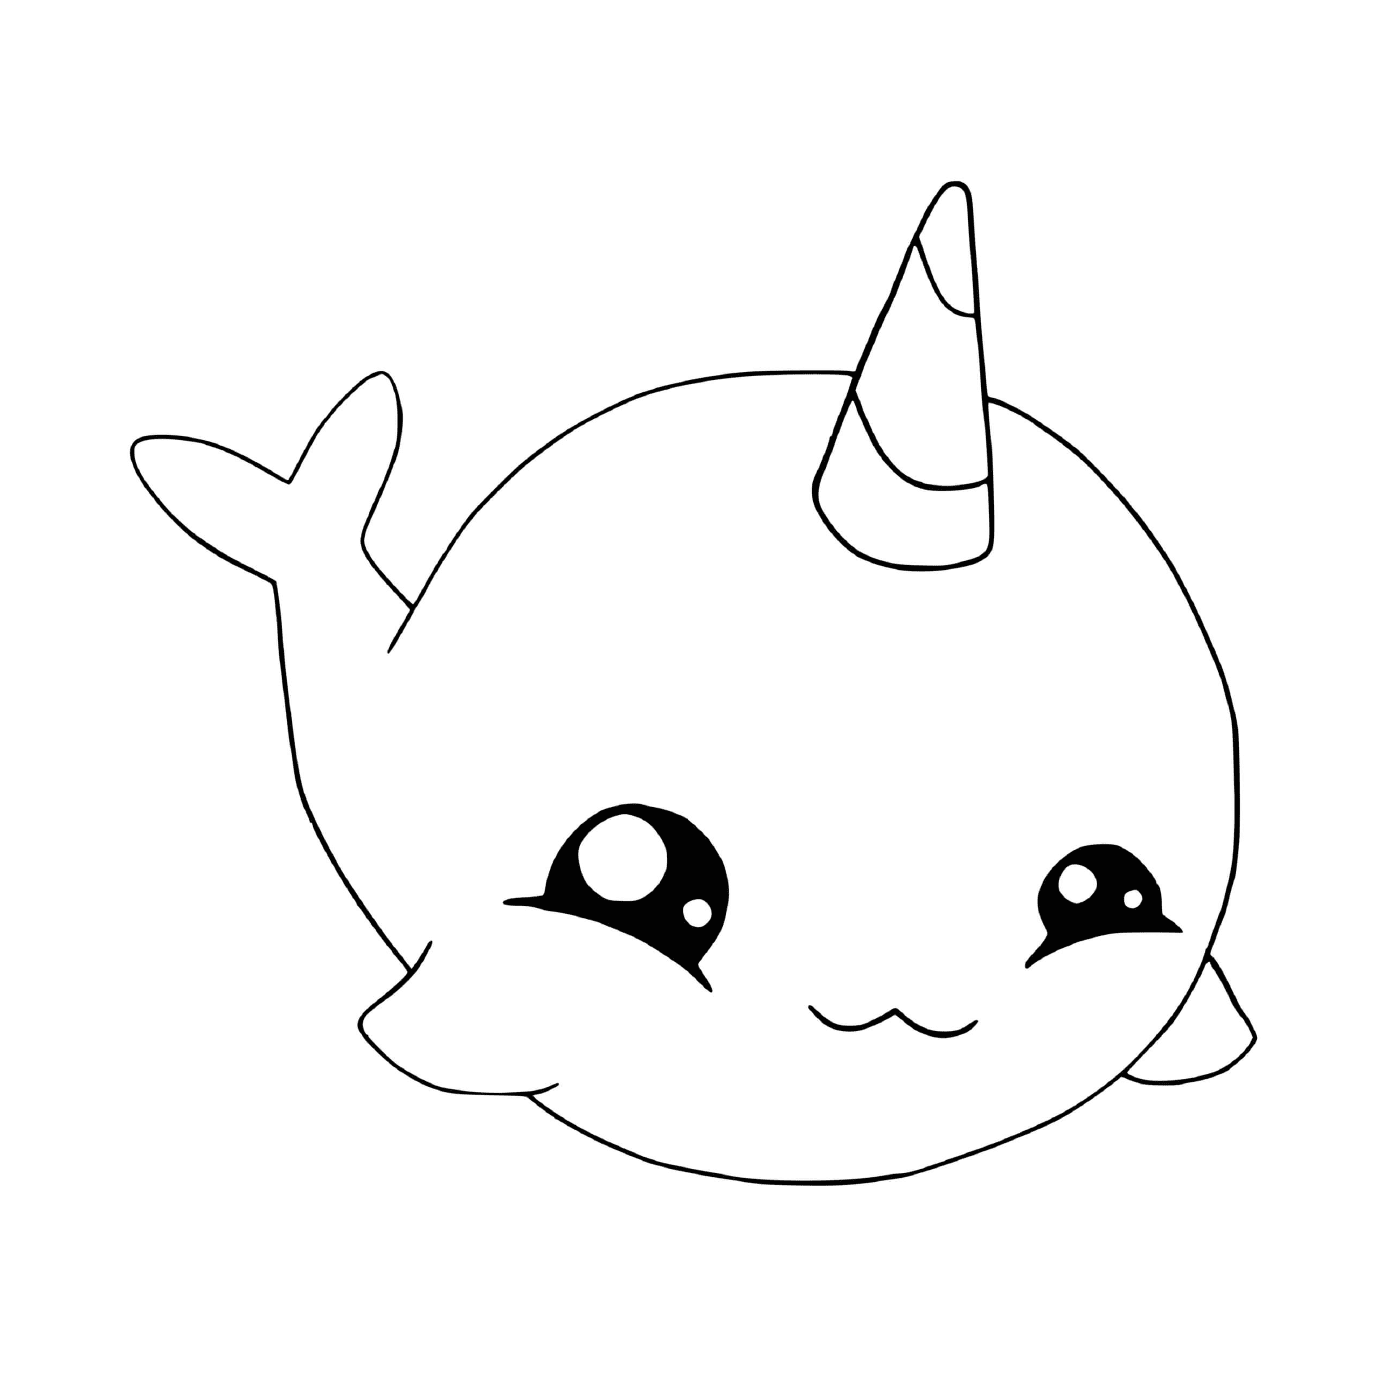  adorable narwhal with unicorn horns 